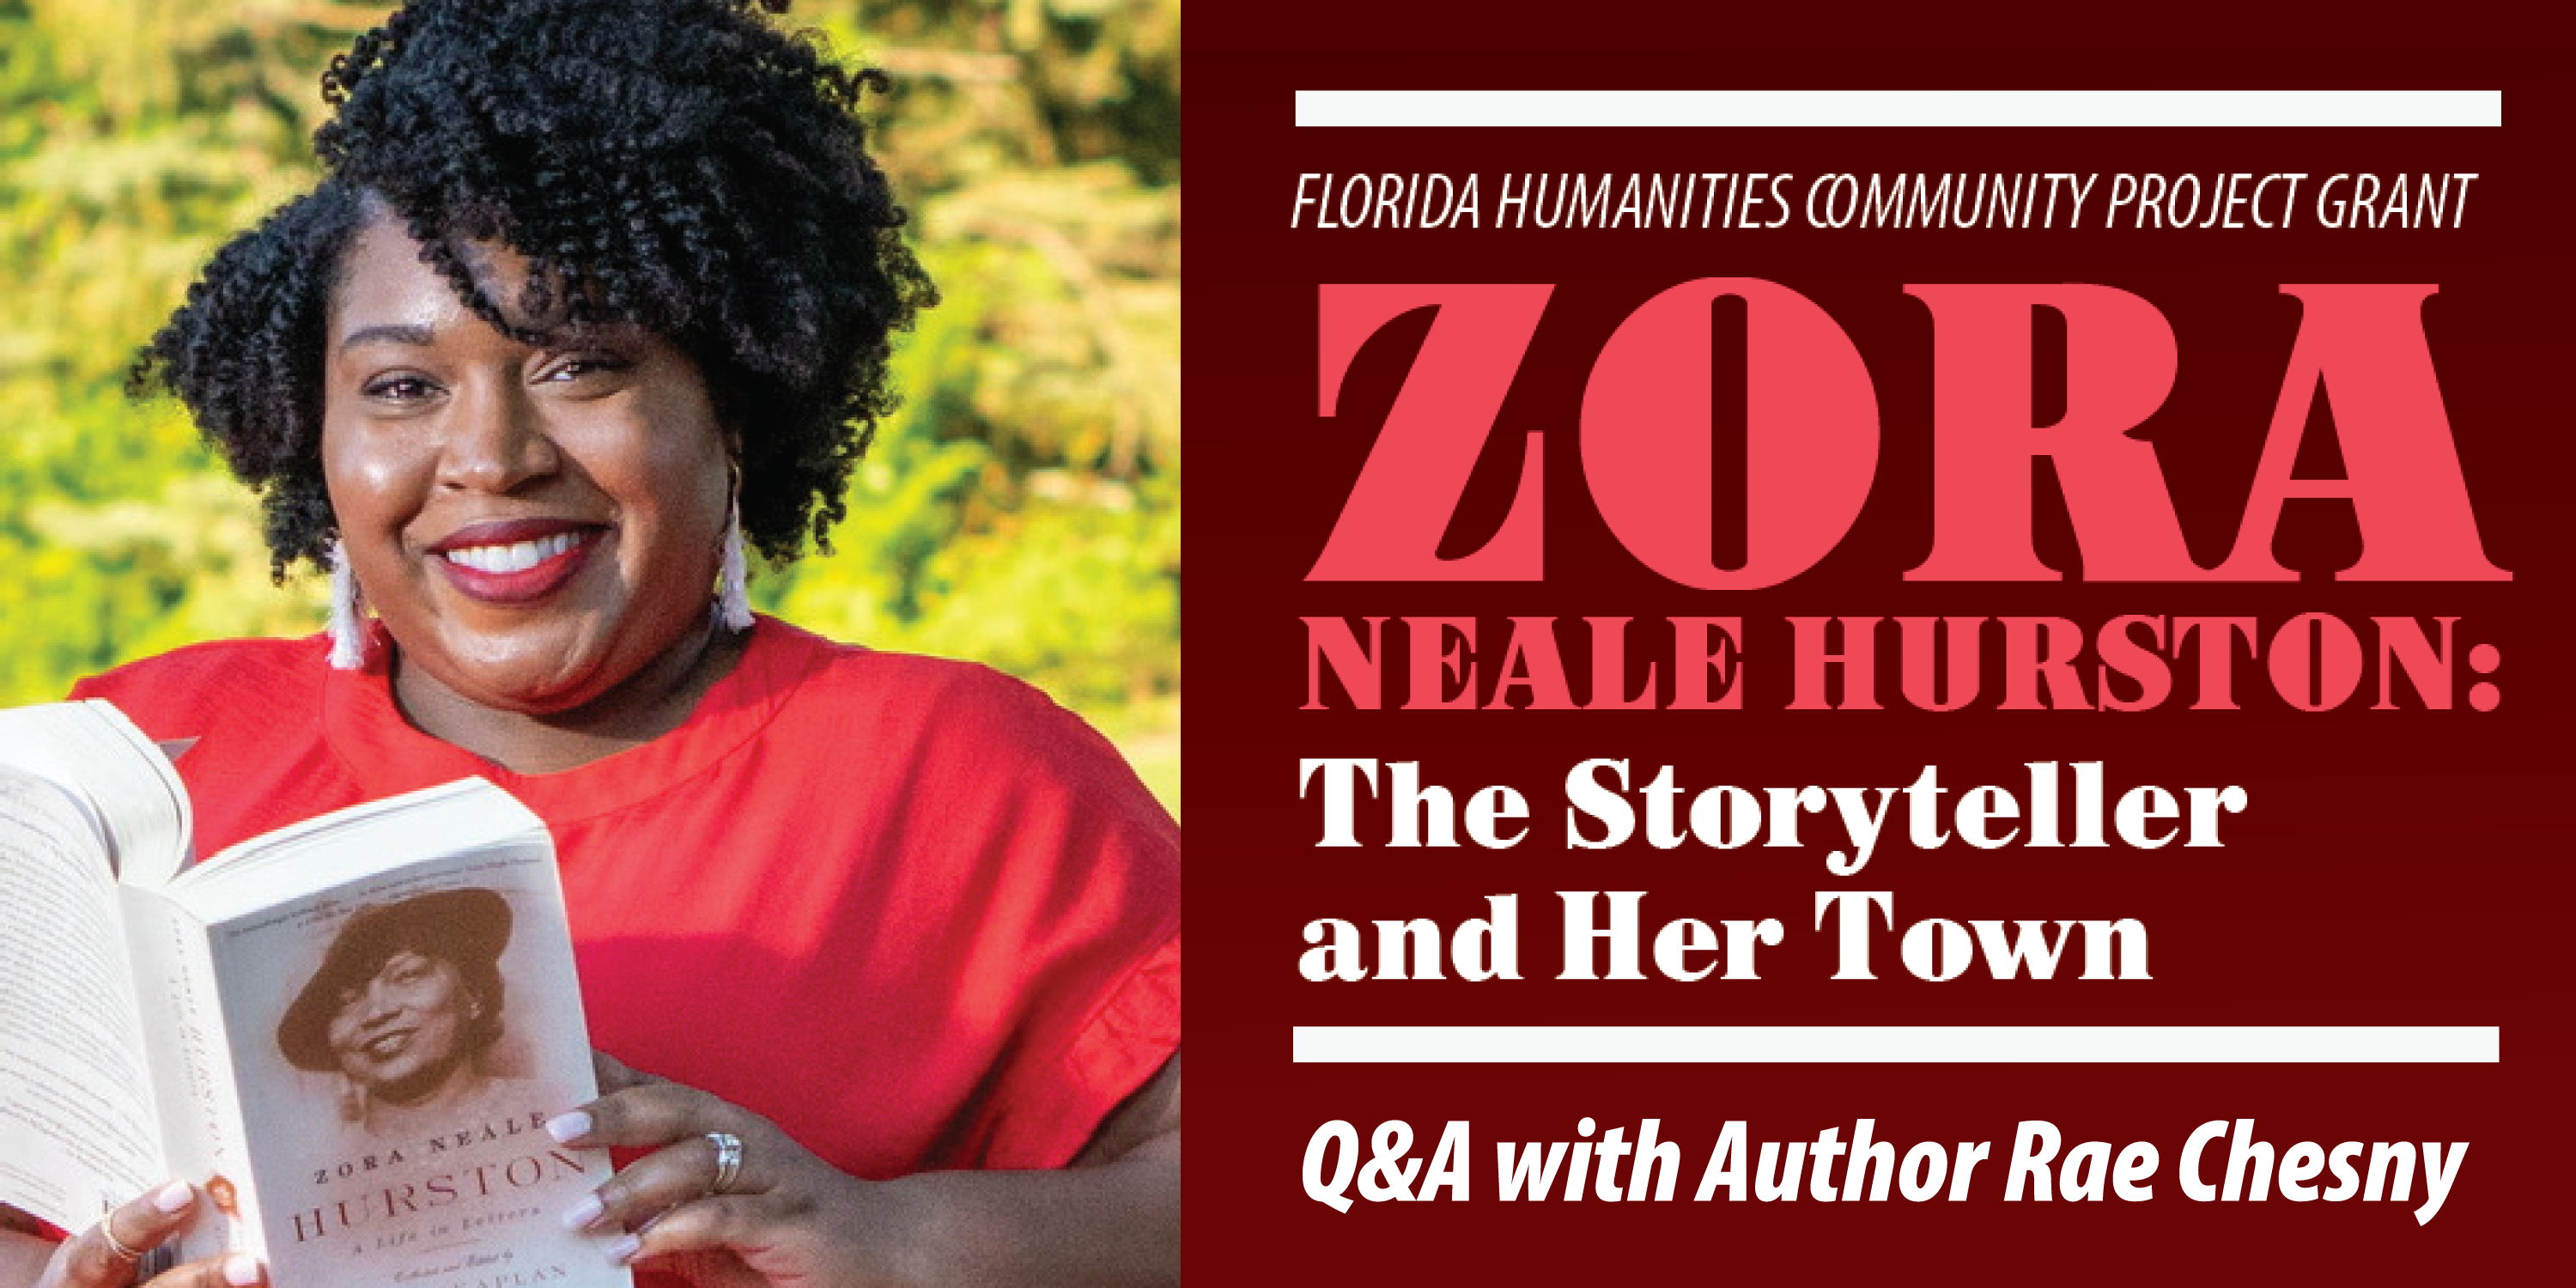 Zora Neale Hurston: The Storyteller and Her Town - Q&A with Author Rae Chesny